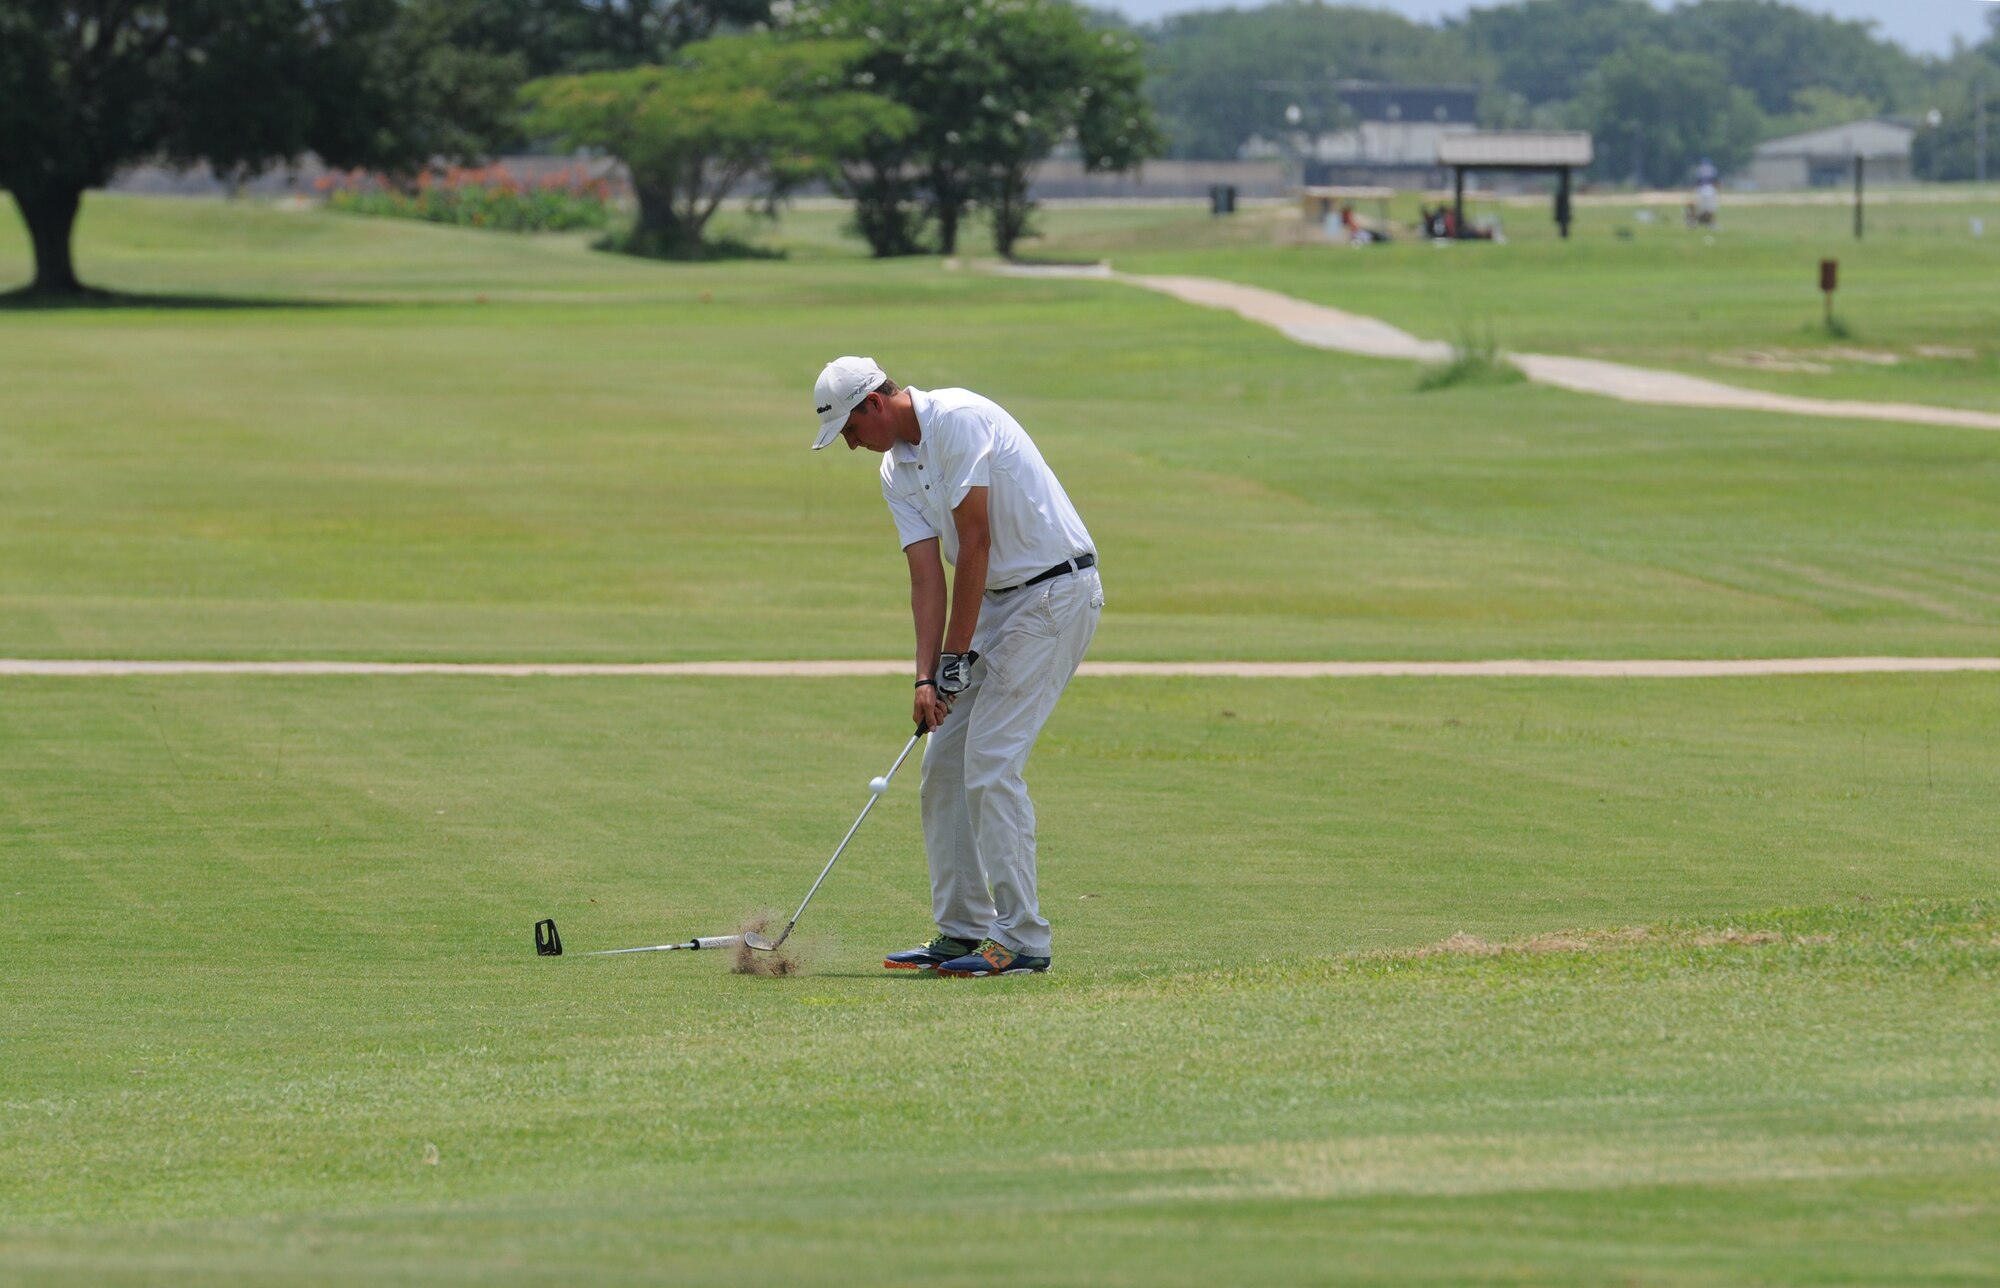 Jacob McClish, 81st Force Support Squadron recreation aid, takes a swing on hole #10 during the Don Wylie Memorial Golf Tournament at the Bay Breeze Golf Course June 17, 2016, Keesler Air Force Base, Miss. The annual tournament raised funds to help the Military & Veterans Affairs committee honor military members. (U.S. Air Force photo by Kemberly Groue)